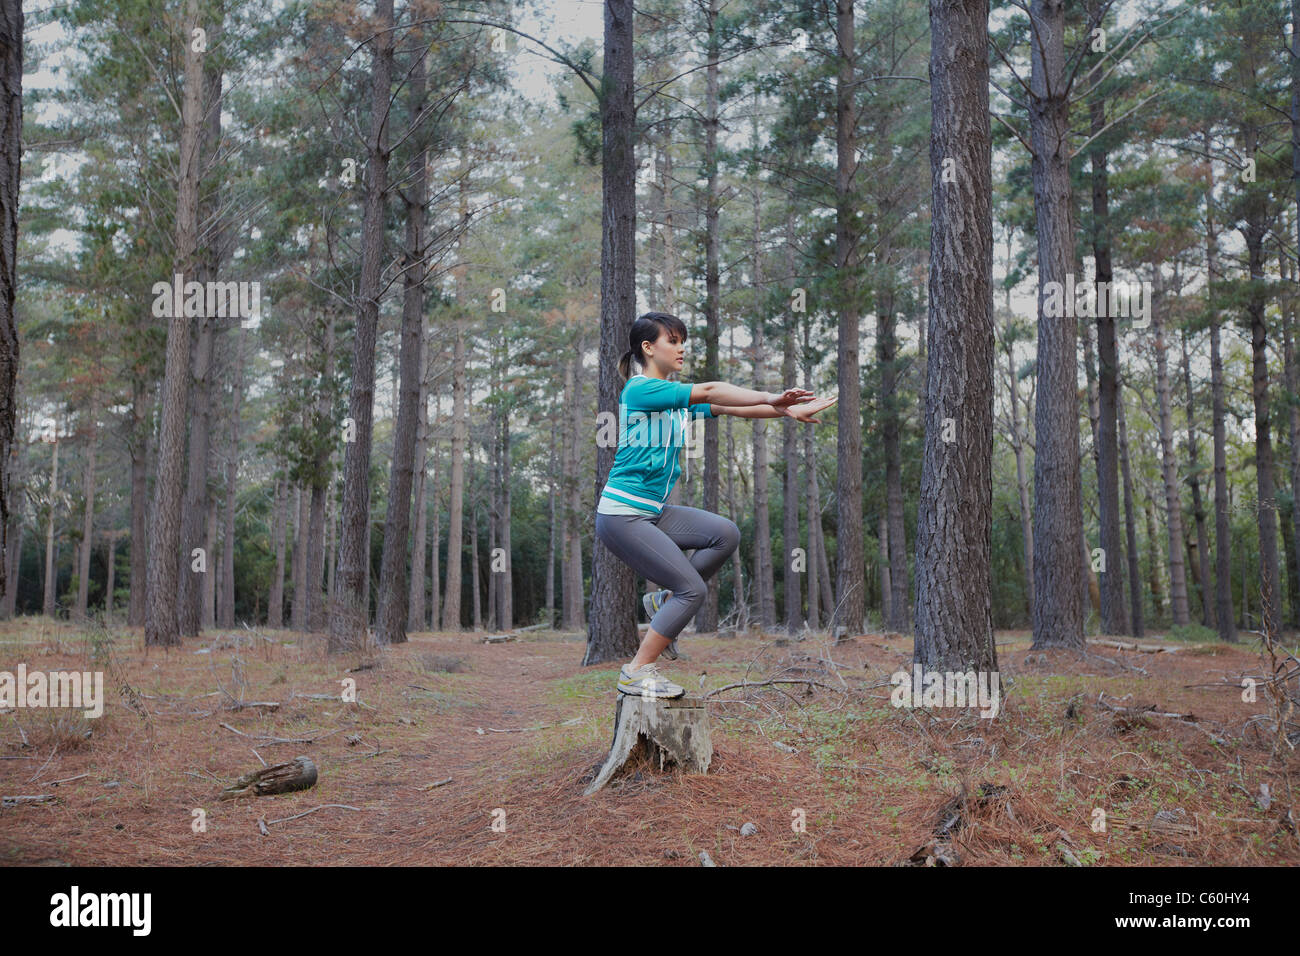 Woman balancing on stump in forest Stock Photo